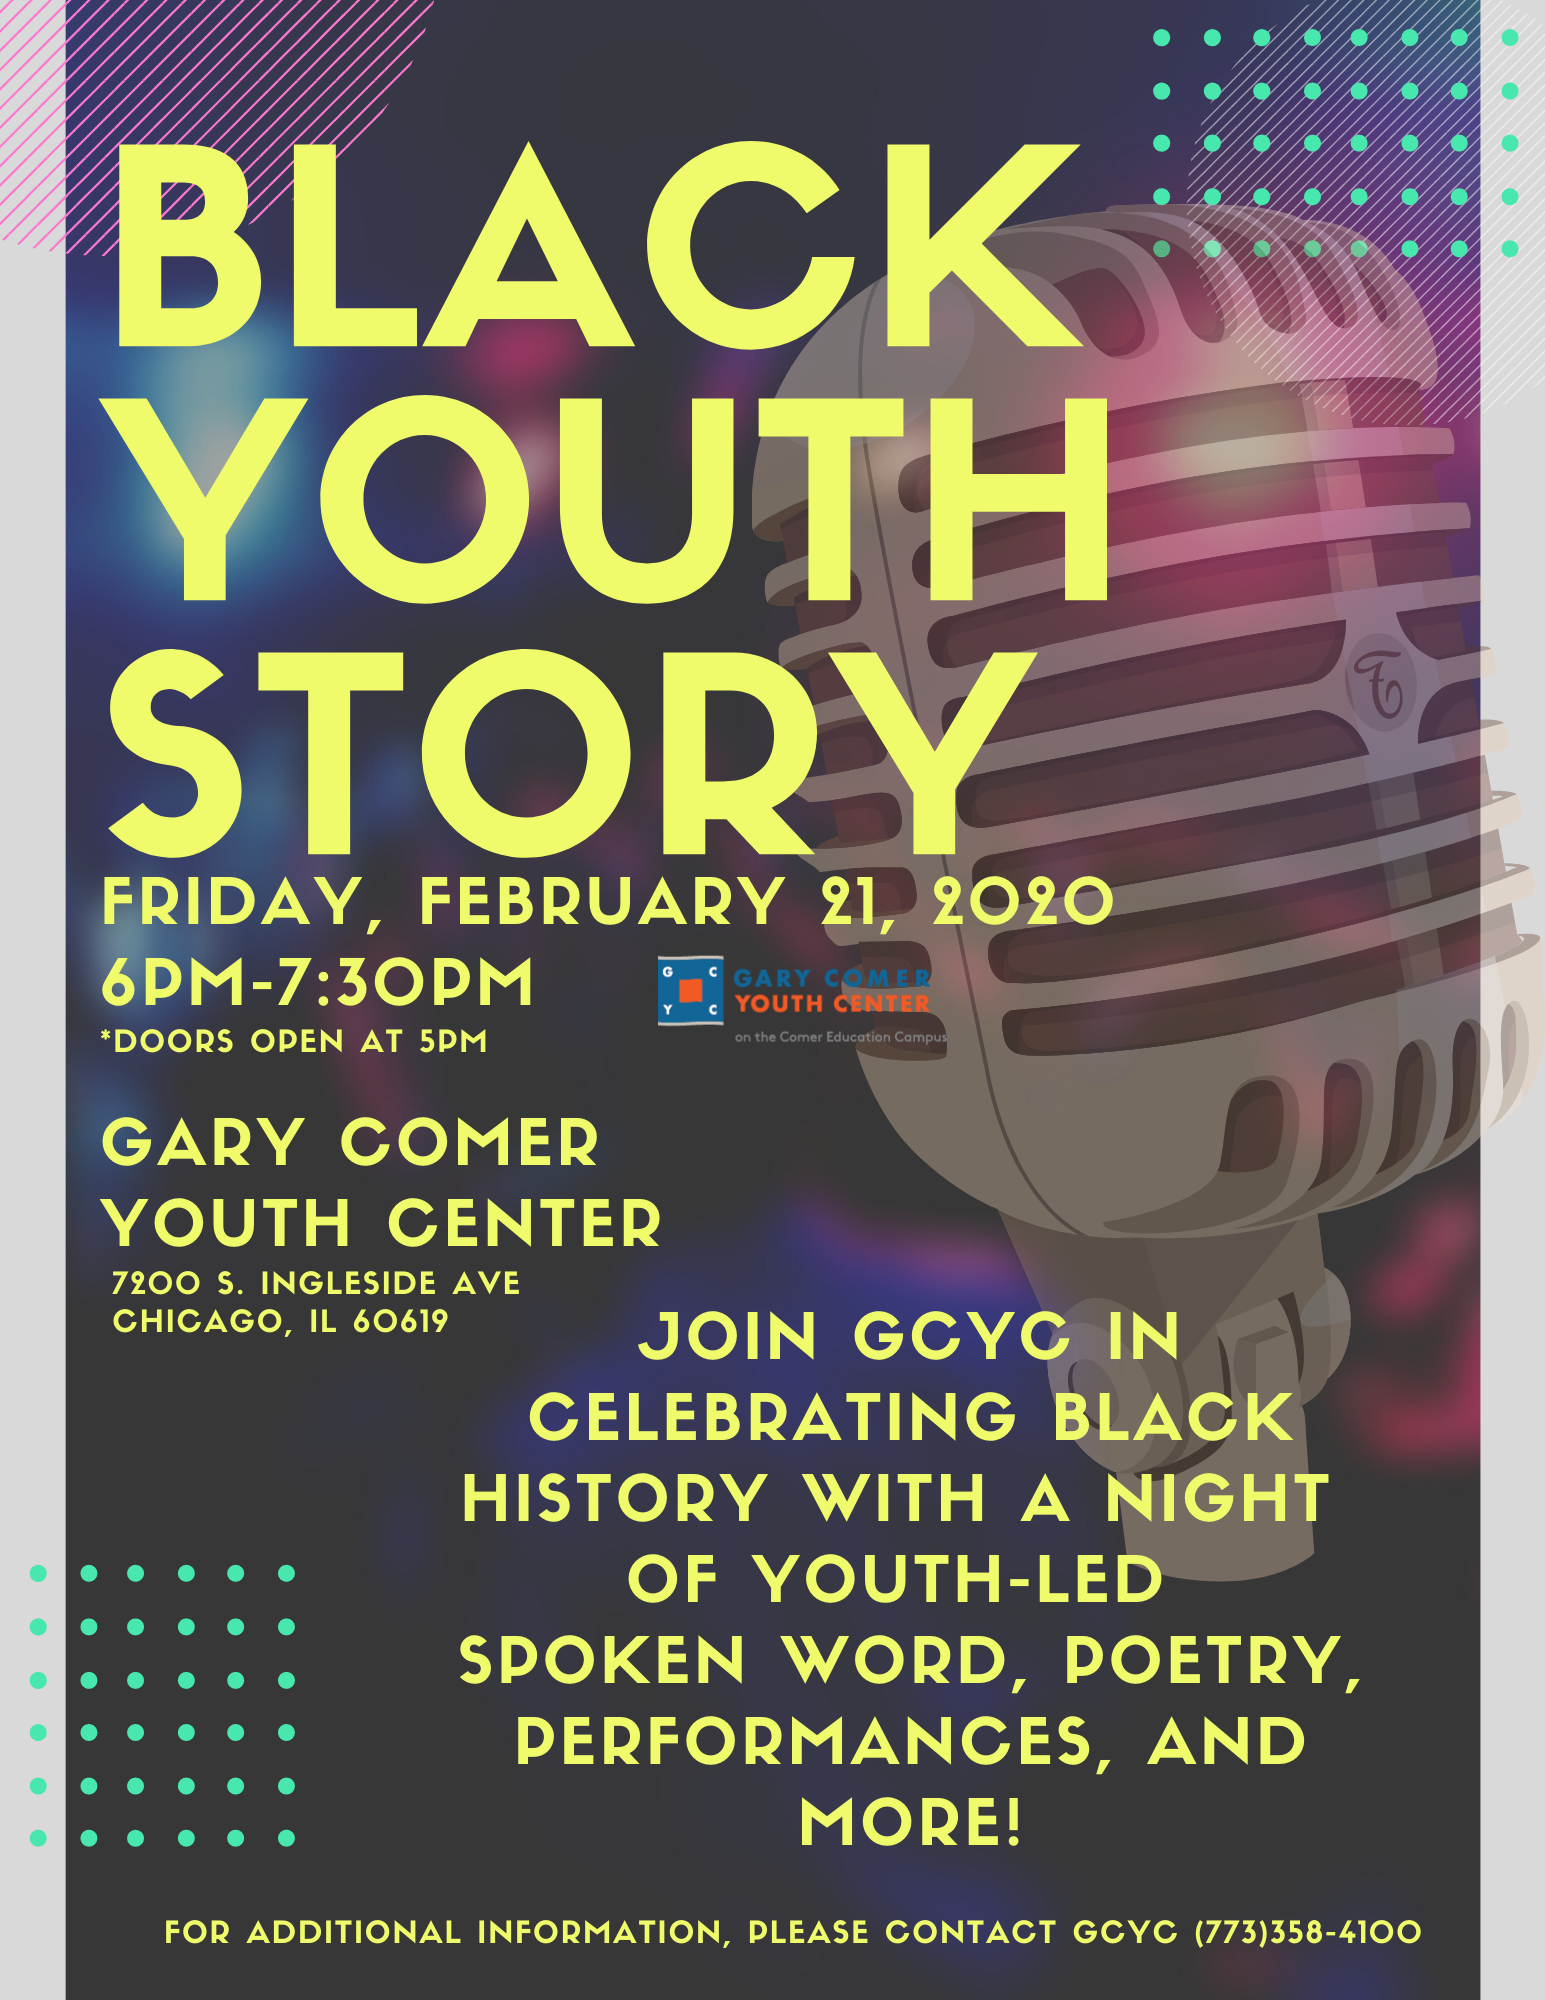 Black Youth Story